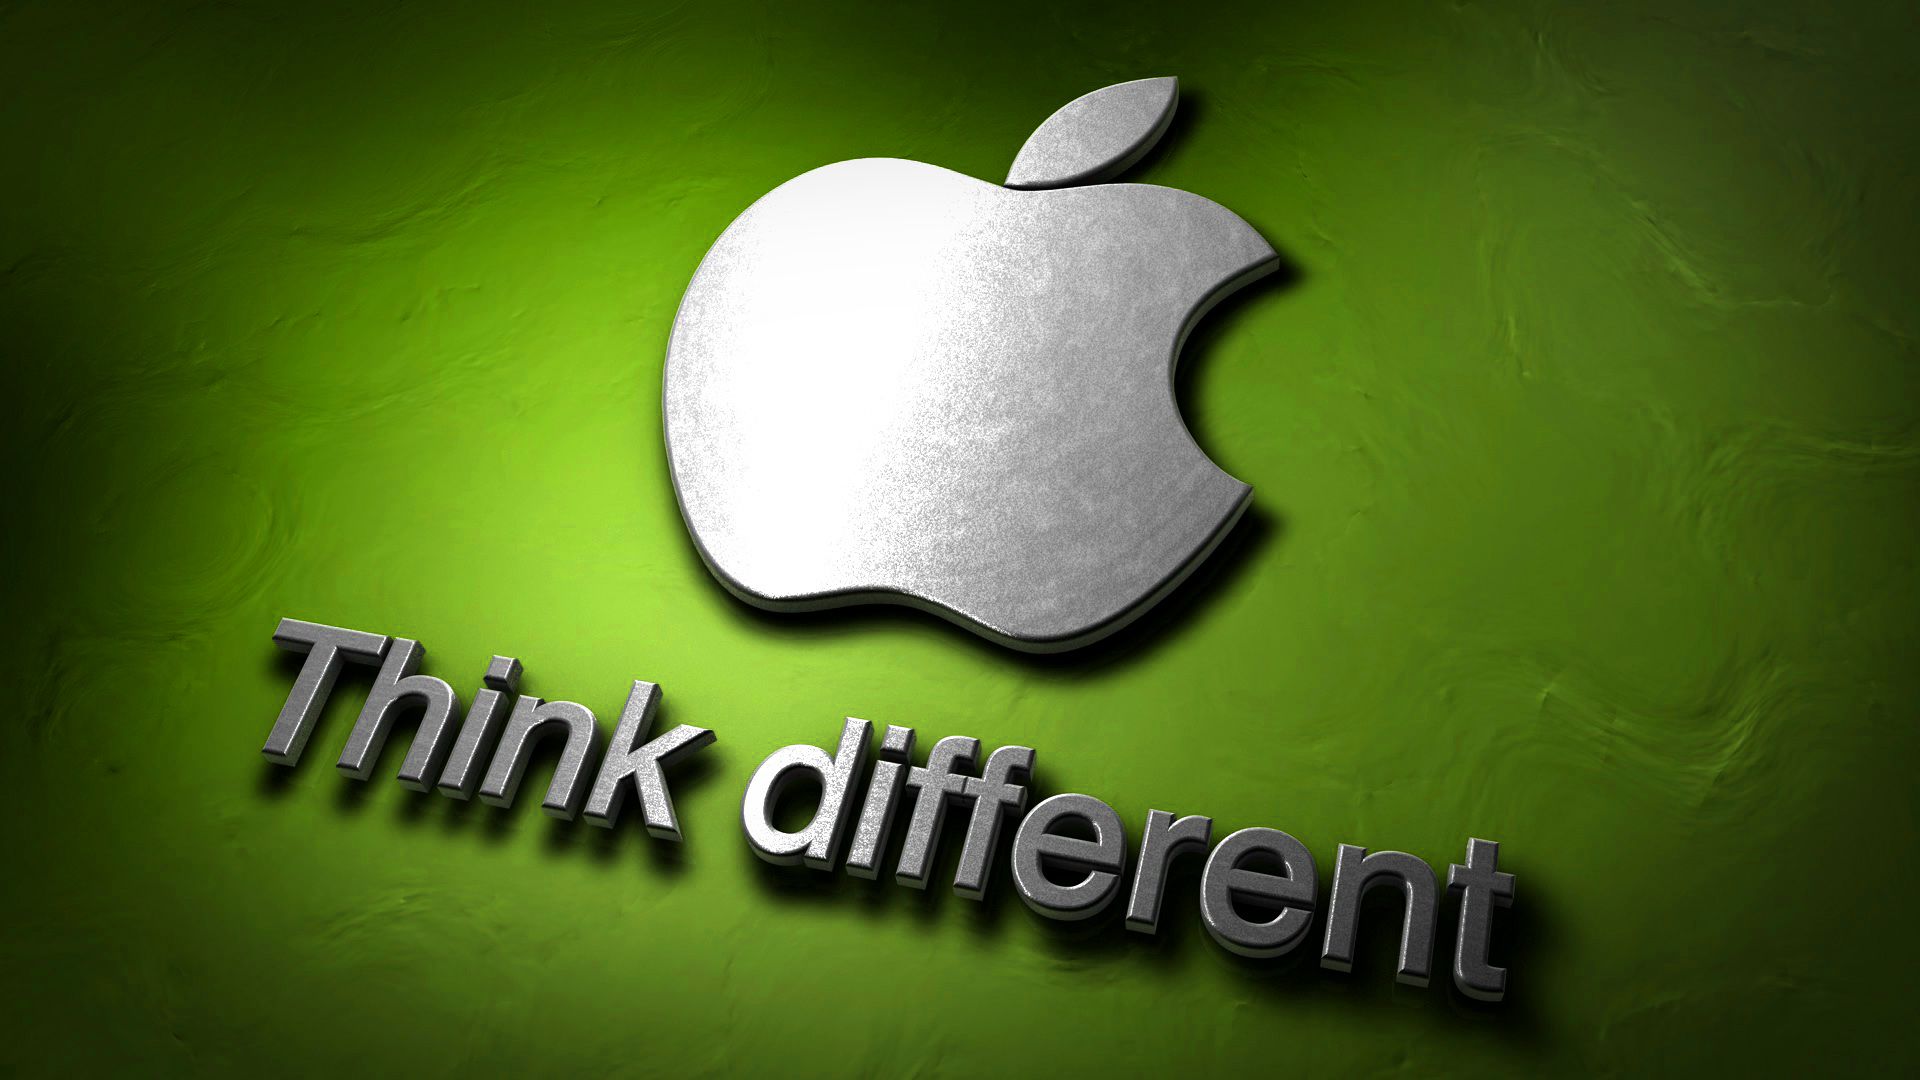 Think Different Wallpaper Desktop Picture #3o4015 - Ehiyo.com